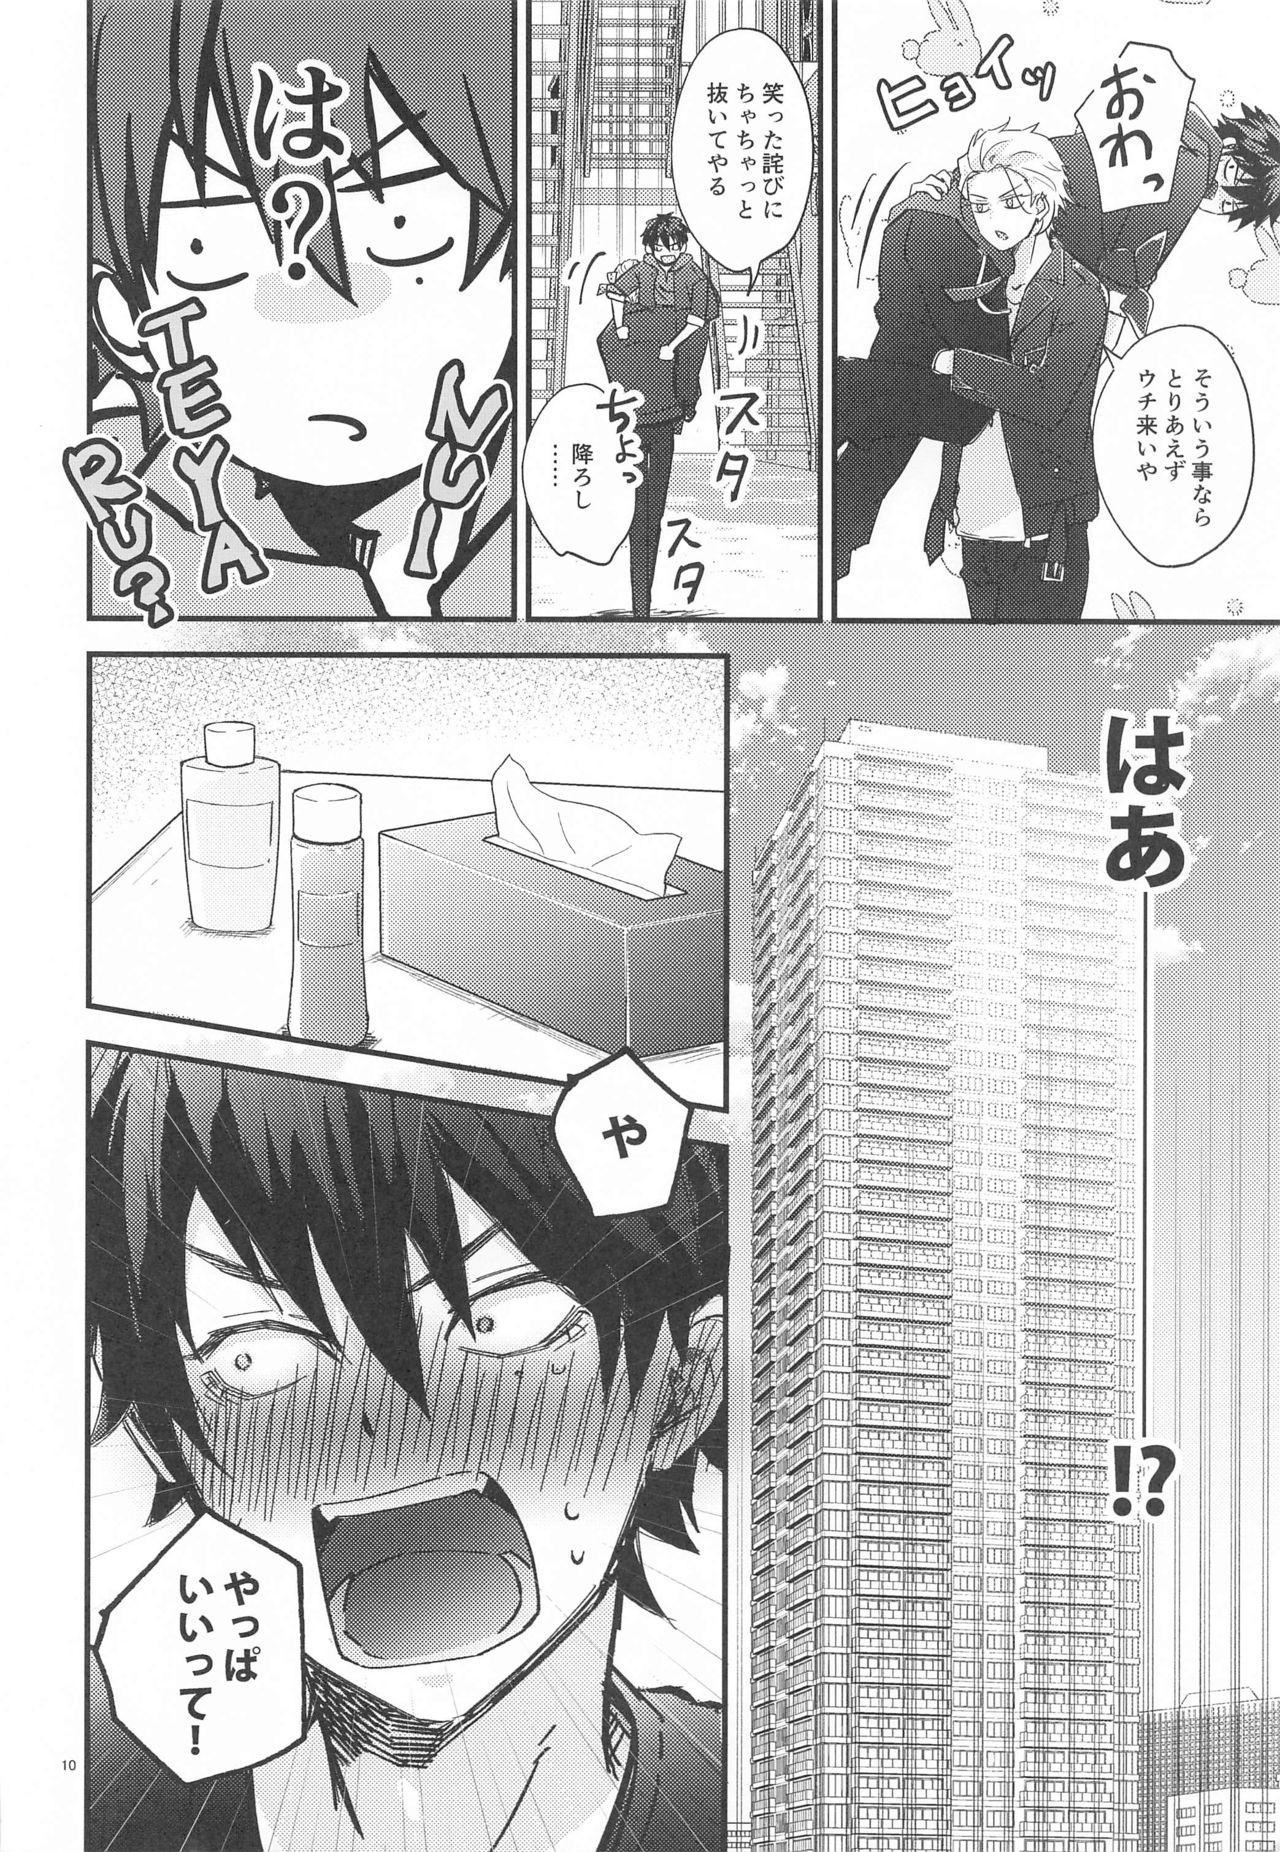 Massive Is this SEX? - Hypnosis mic Chinese - Page 11